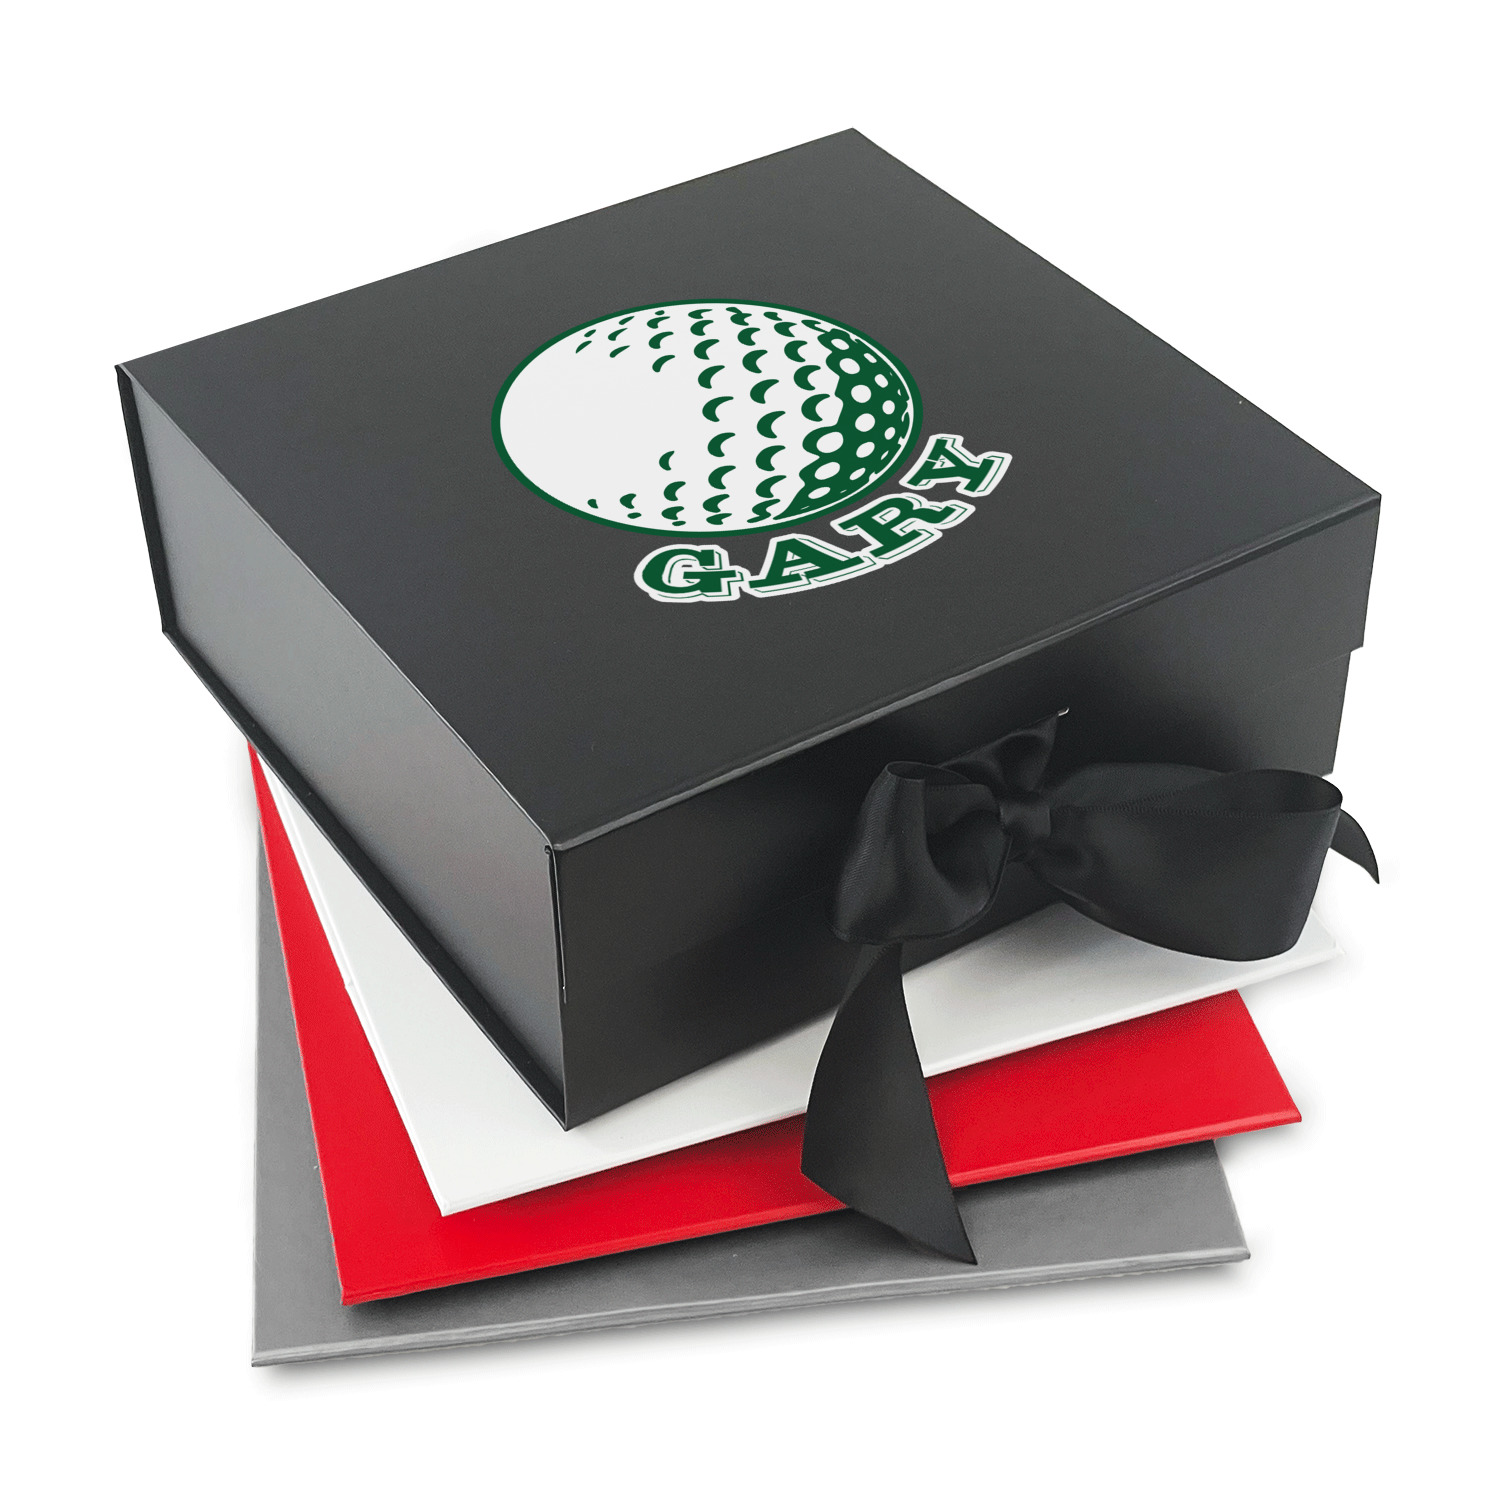 https://www.youcustomizeit.com/common/MAKE/1844584/Golf-Gift-Boxes-with-Magnetic-Lid-Parent-Main.jpg?lm=1697665128